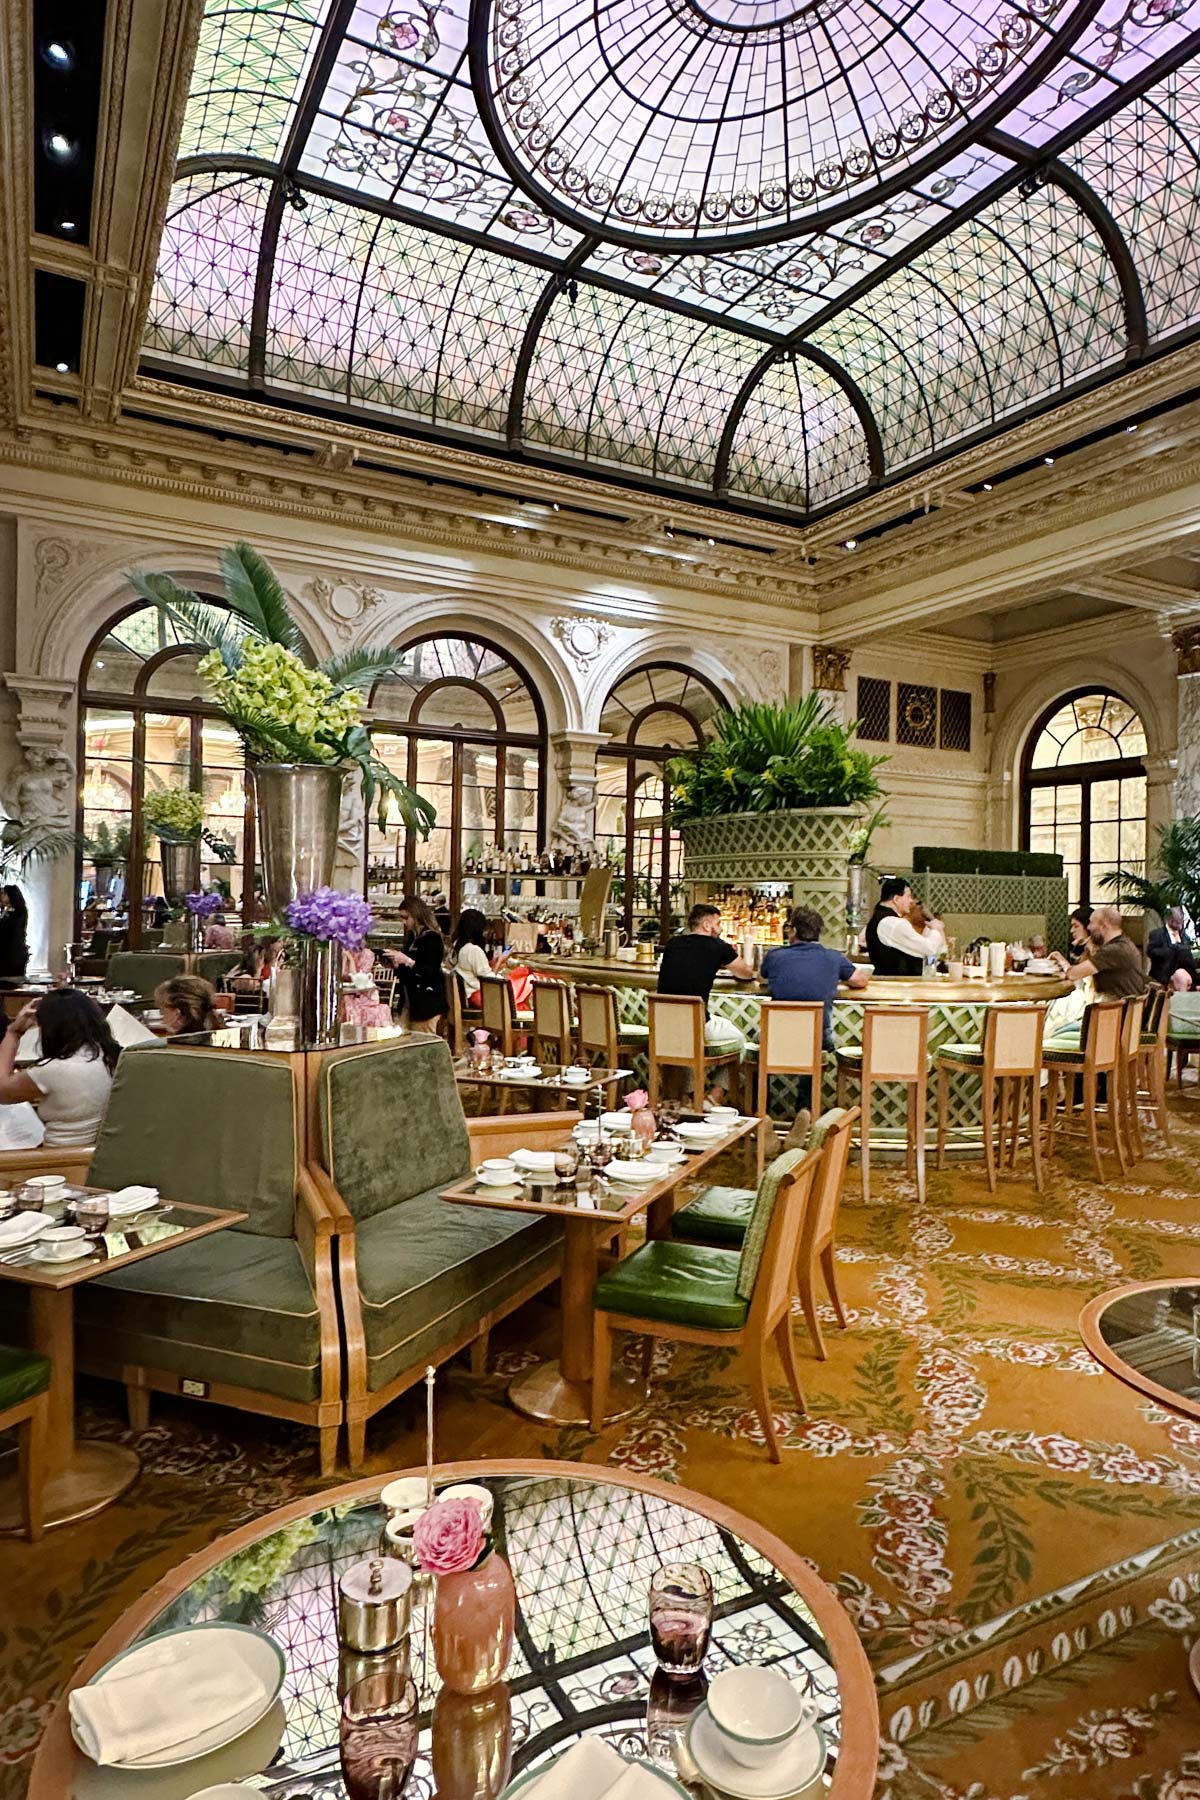 Interior of the Palm Court inside The Plaza hotel.